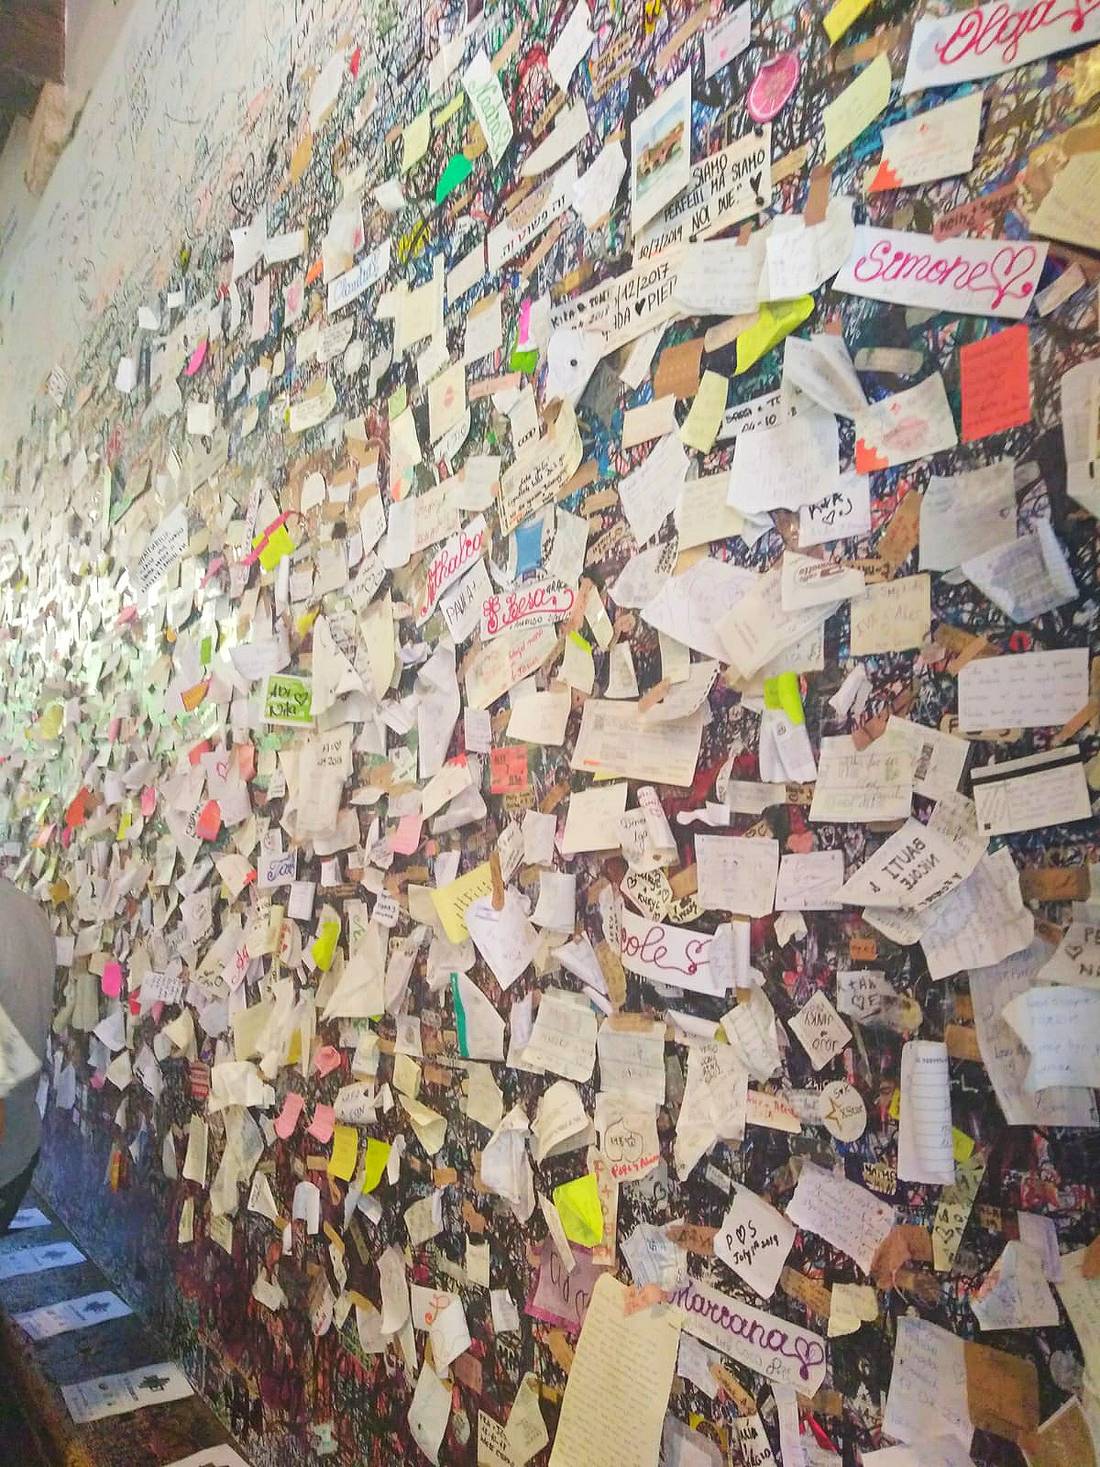 Thousands of little pieces of paper - love vows of couples